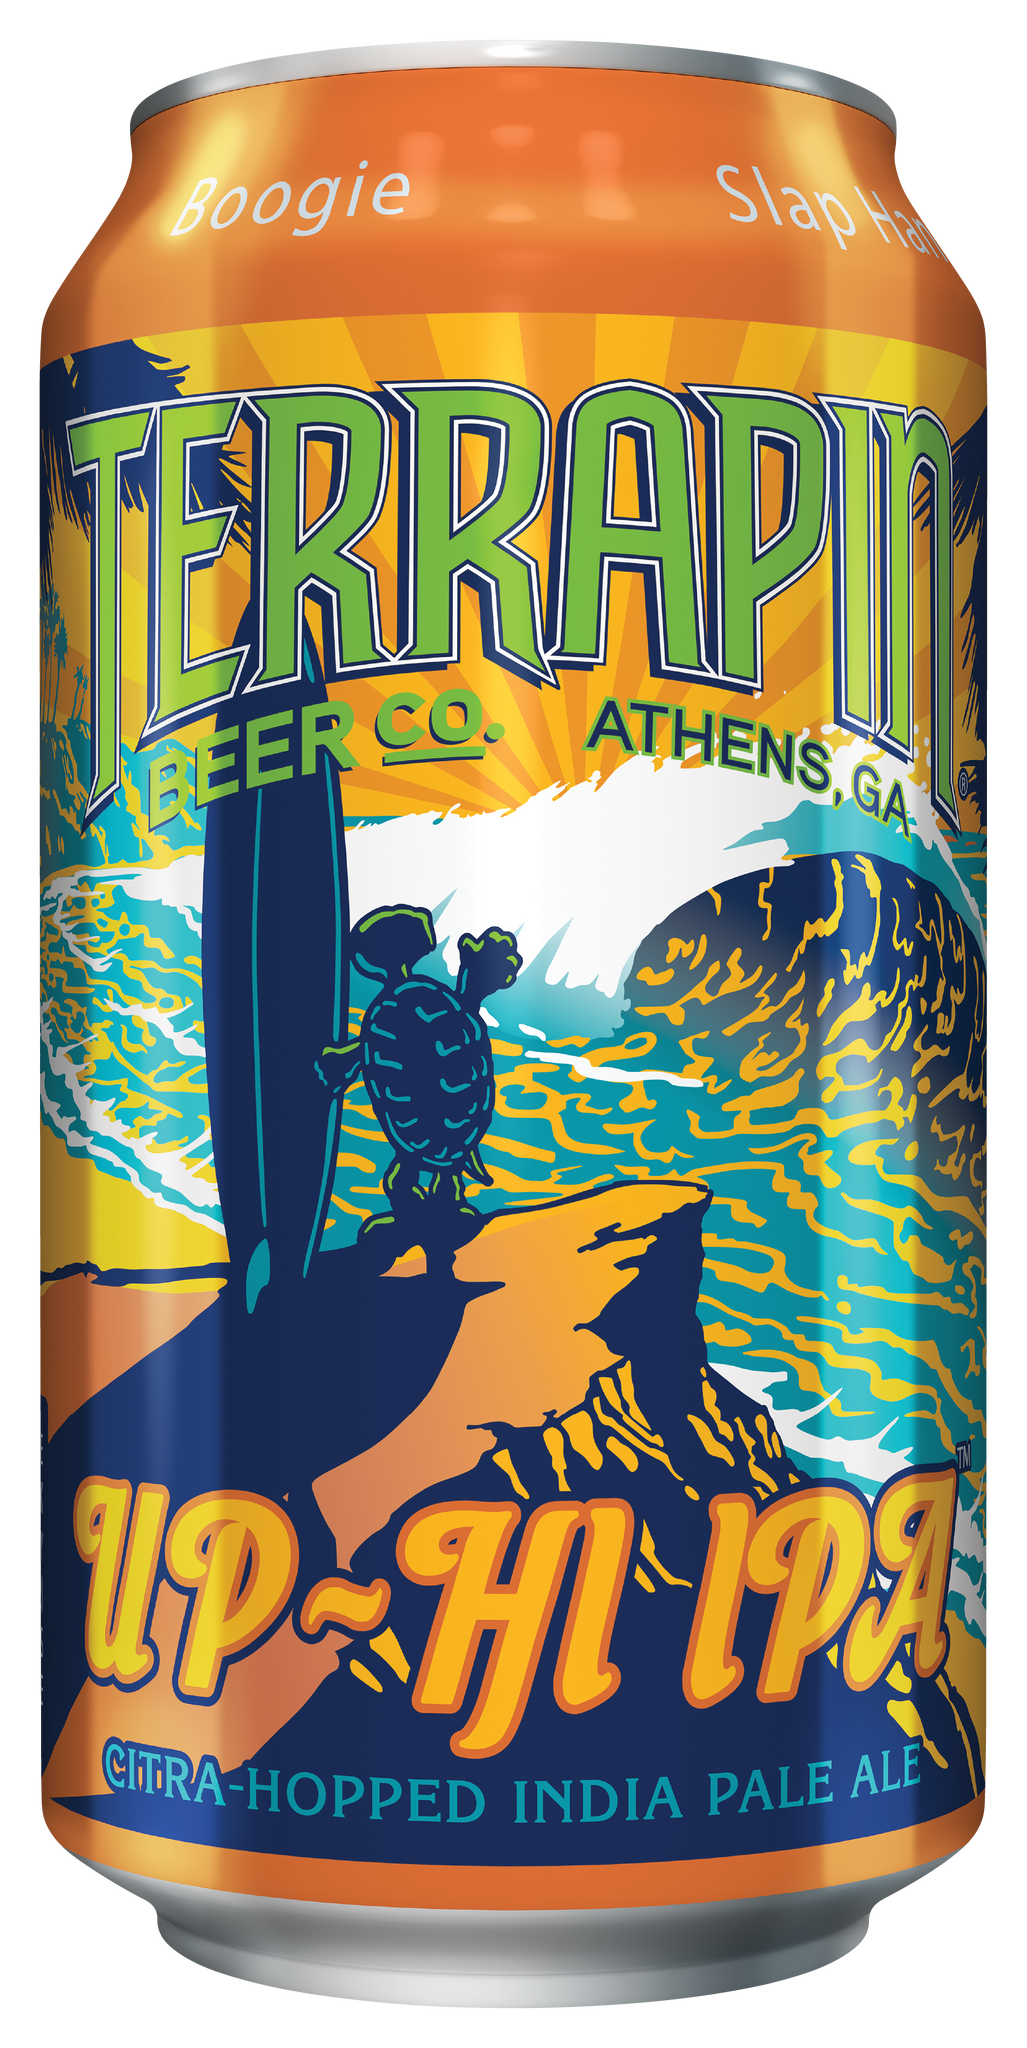 Los Bravos Mexican-Style Lager – Terrapin Beer Co.